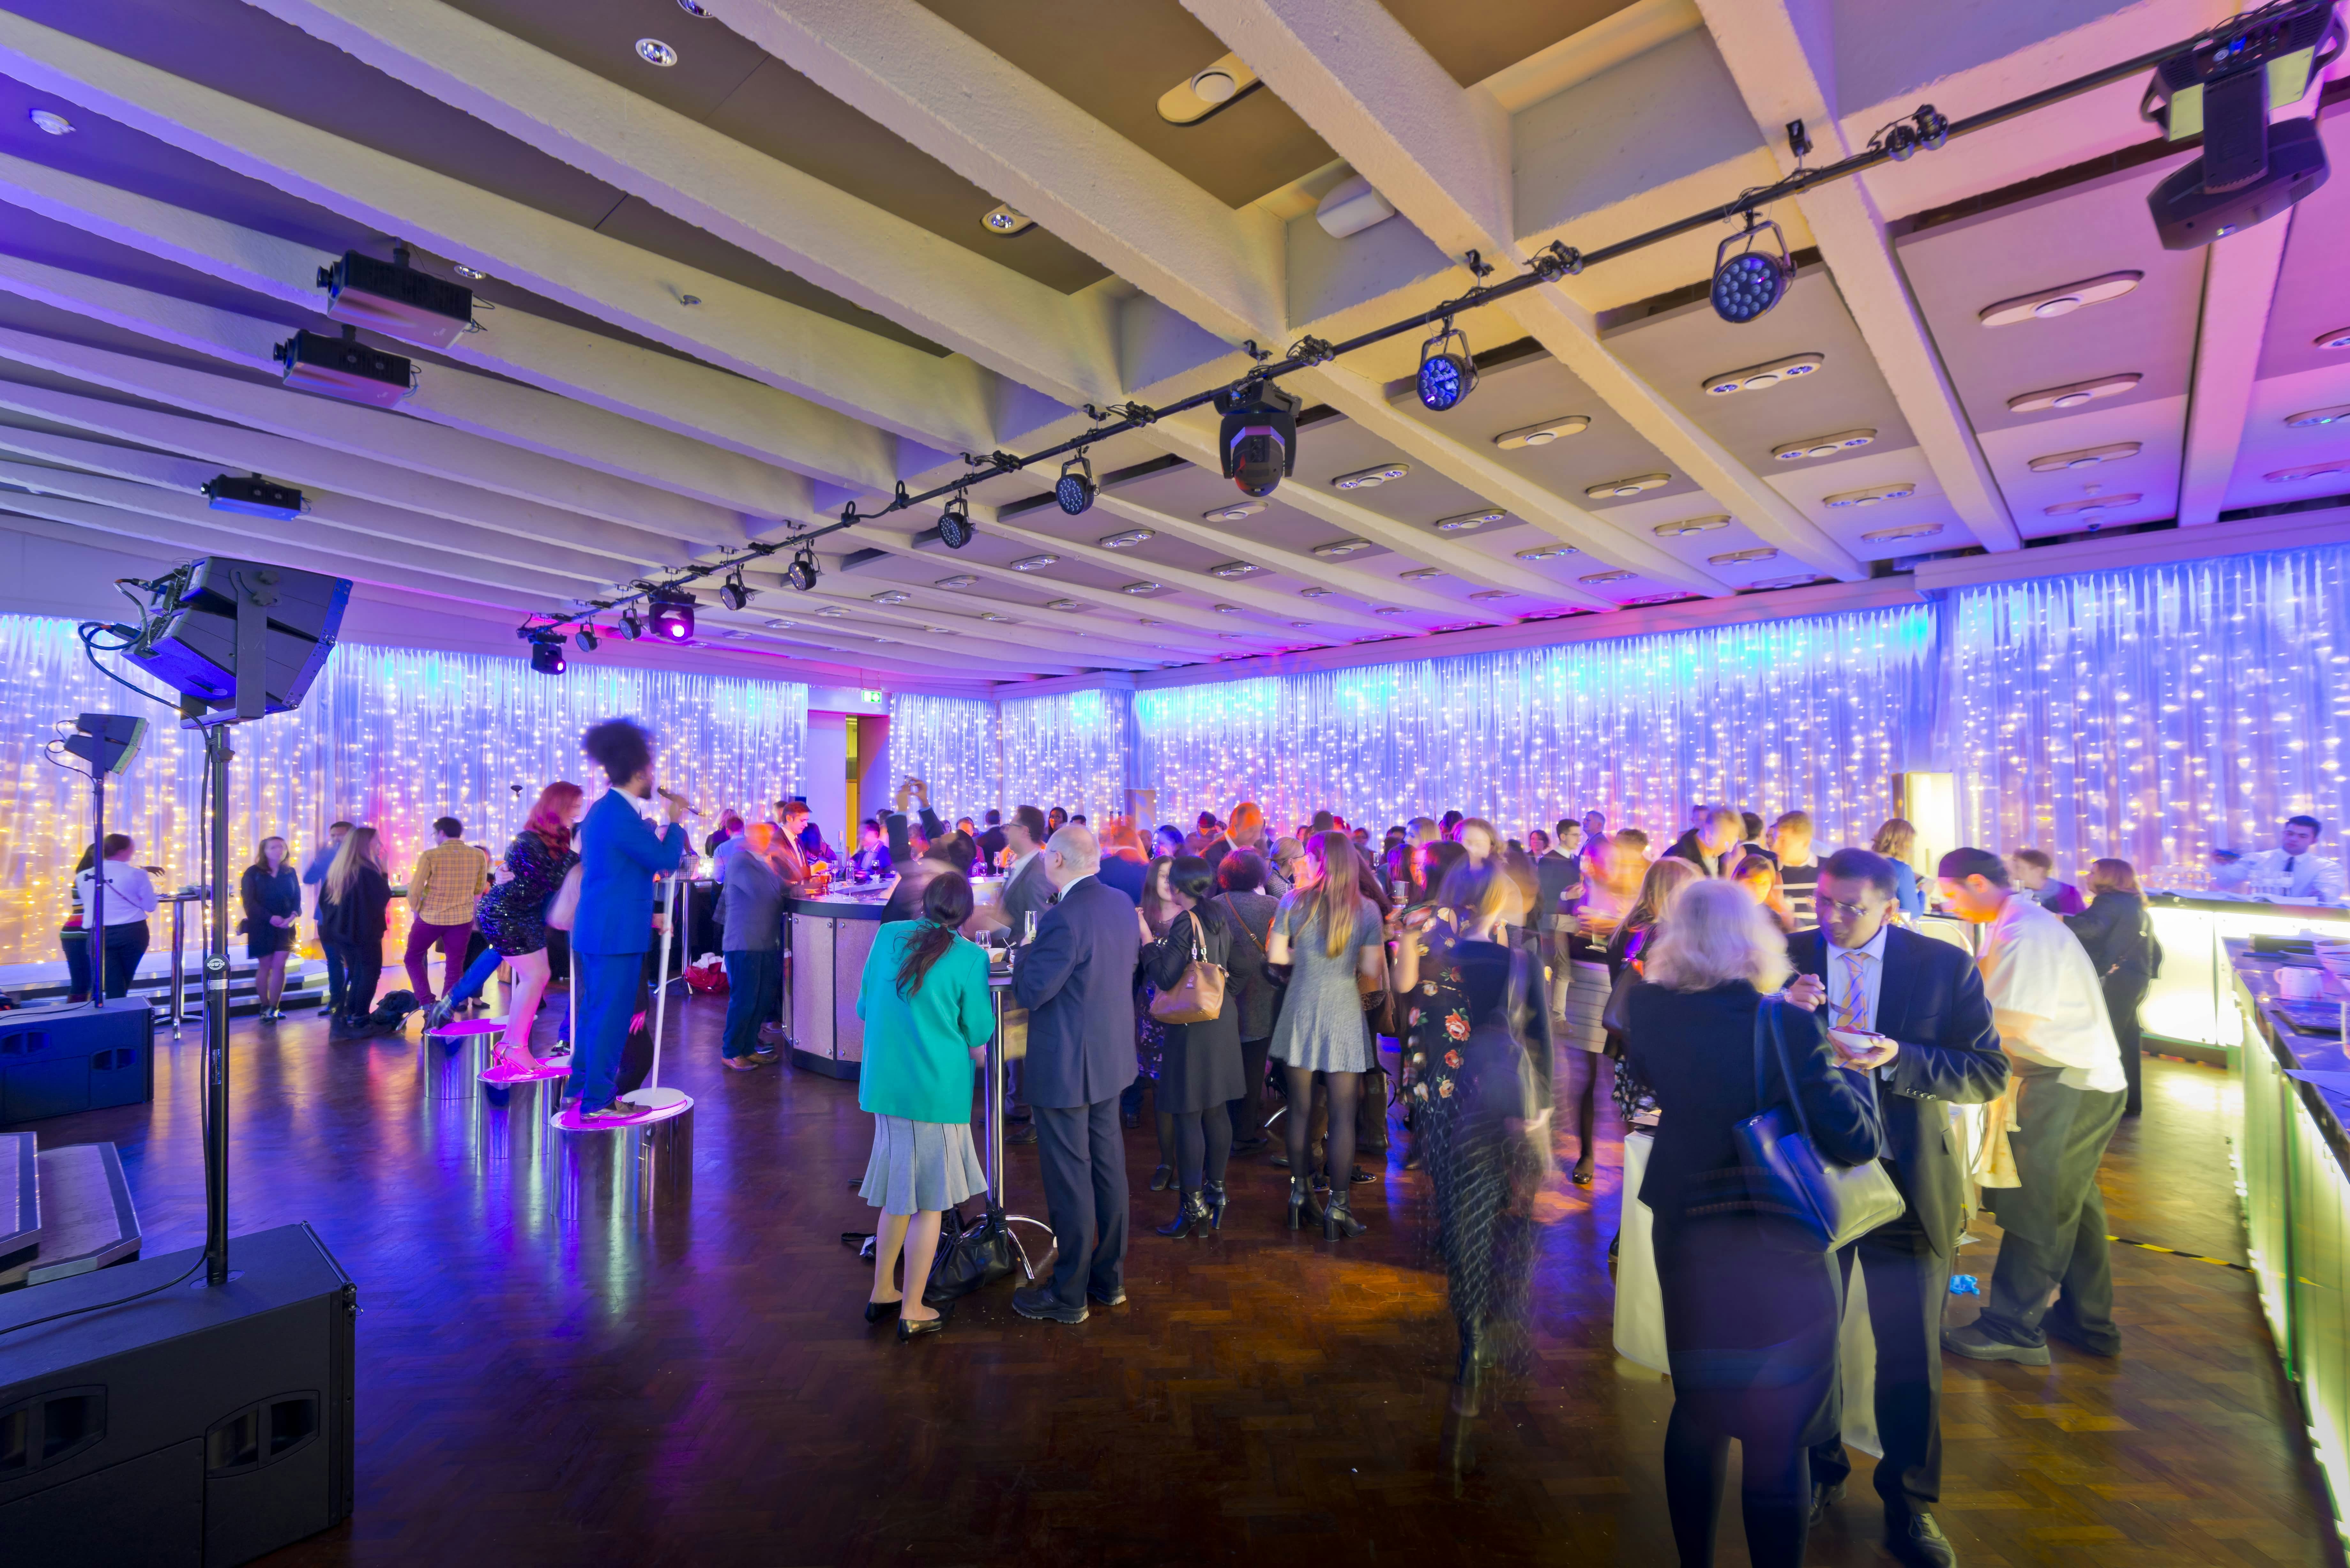 Awards Ceremony Venues in London - One Moorgate Place